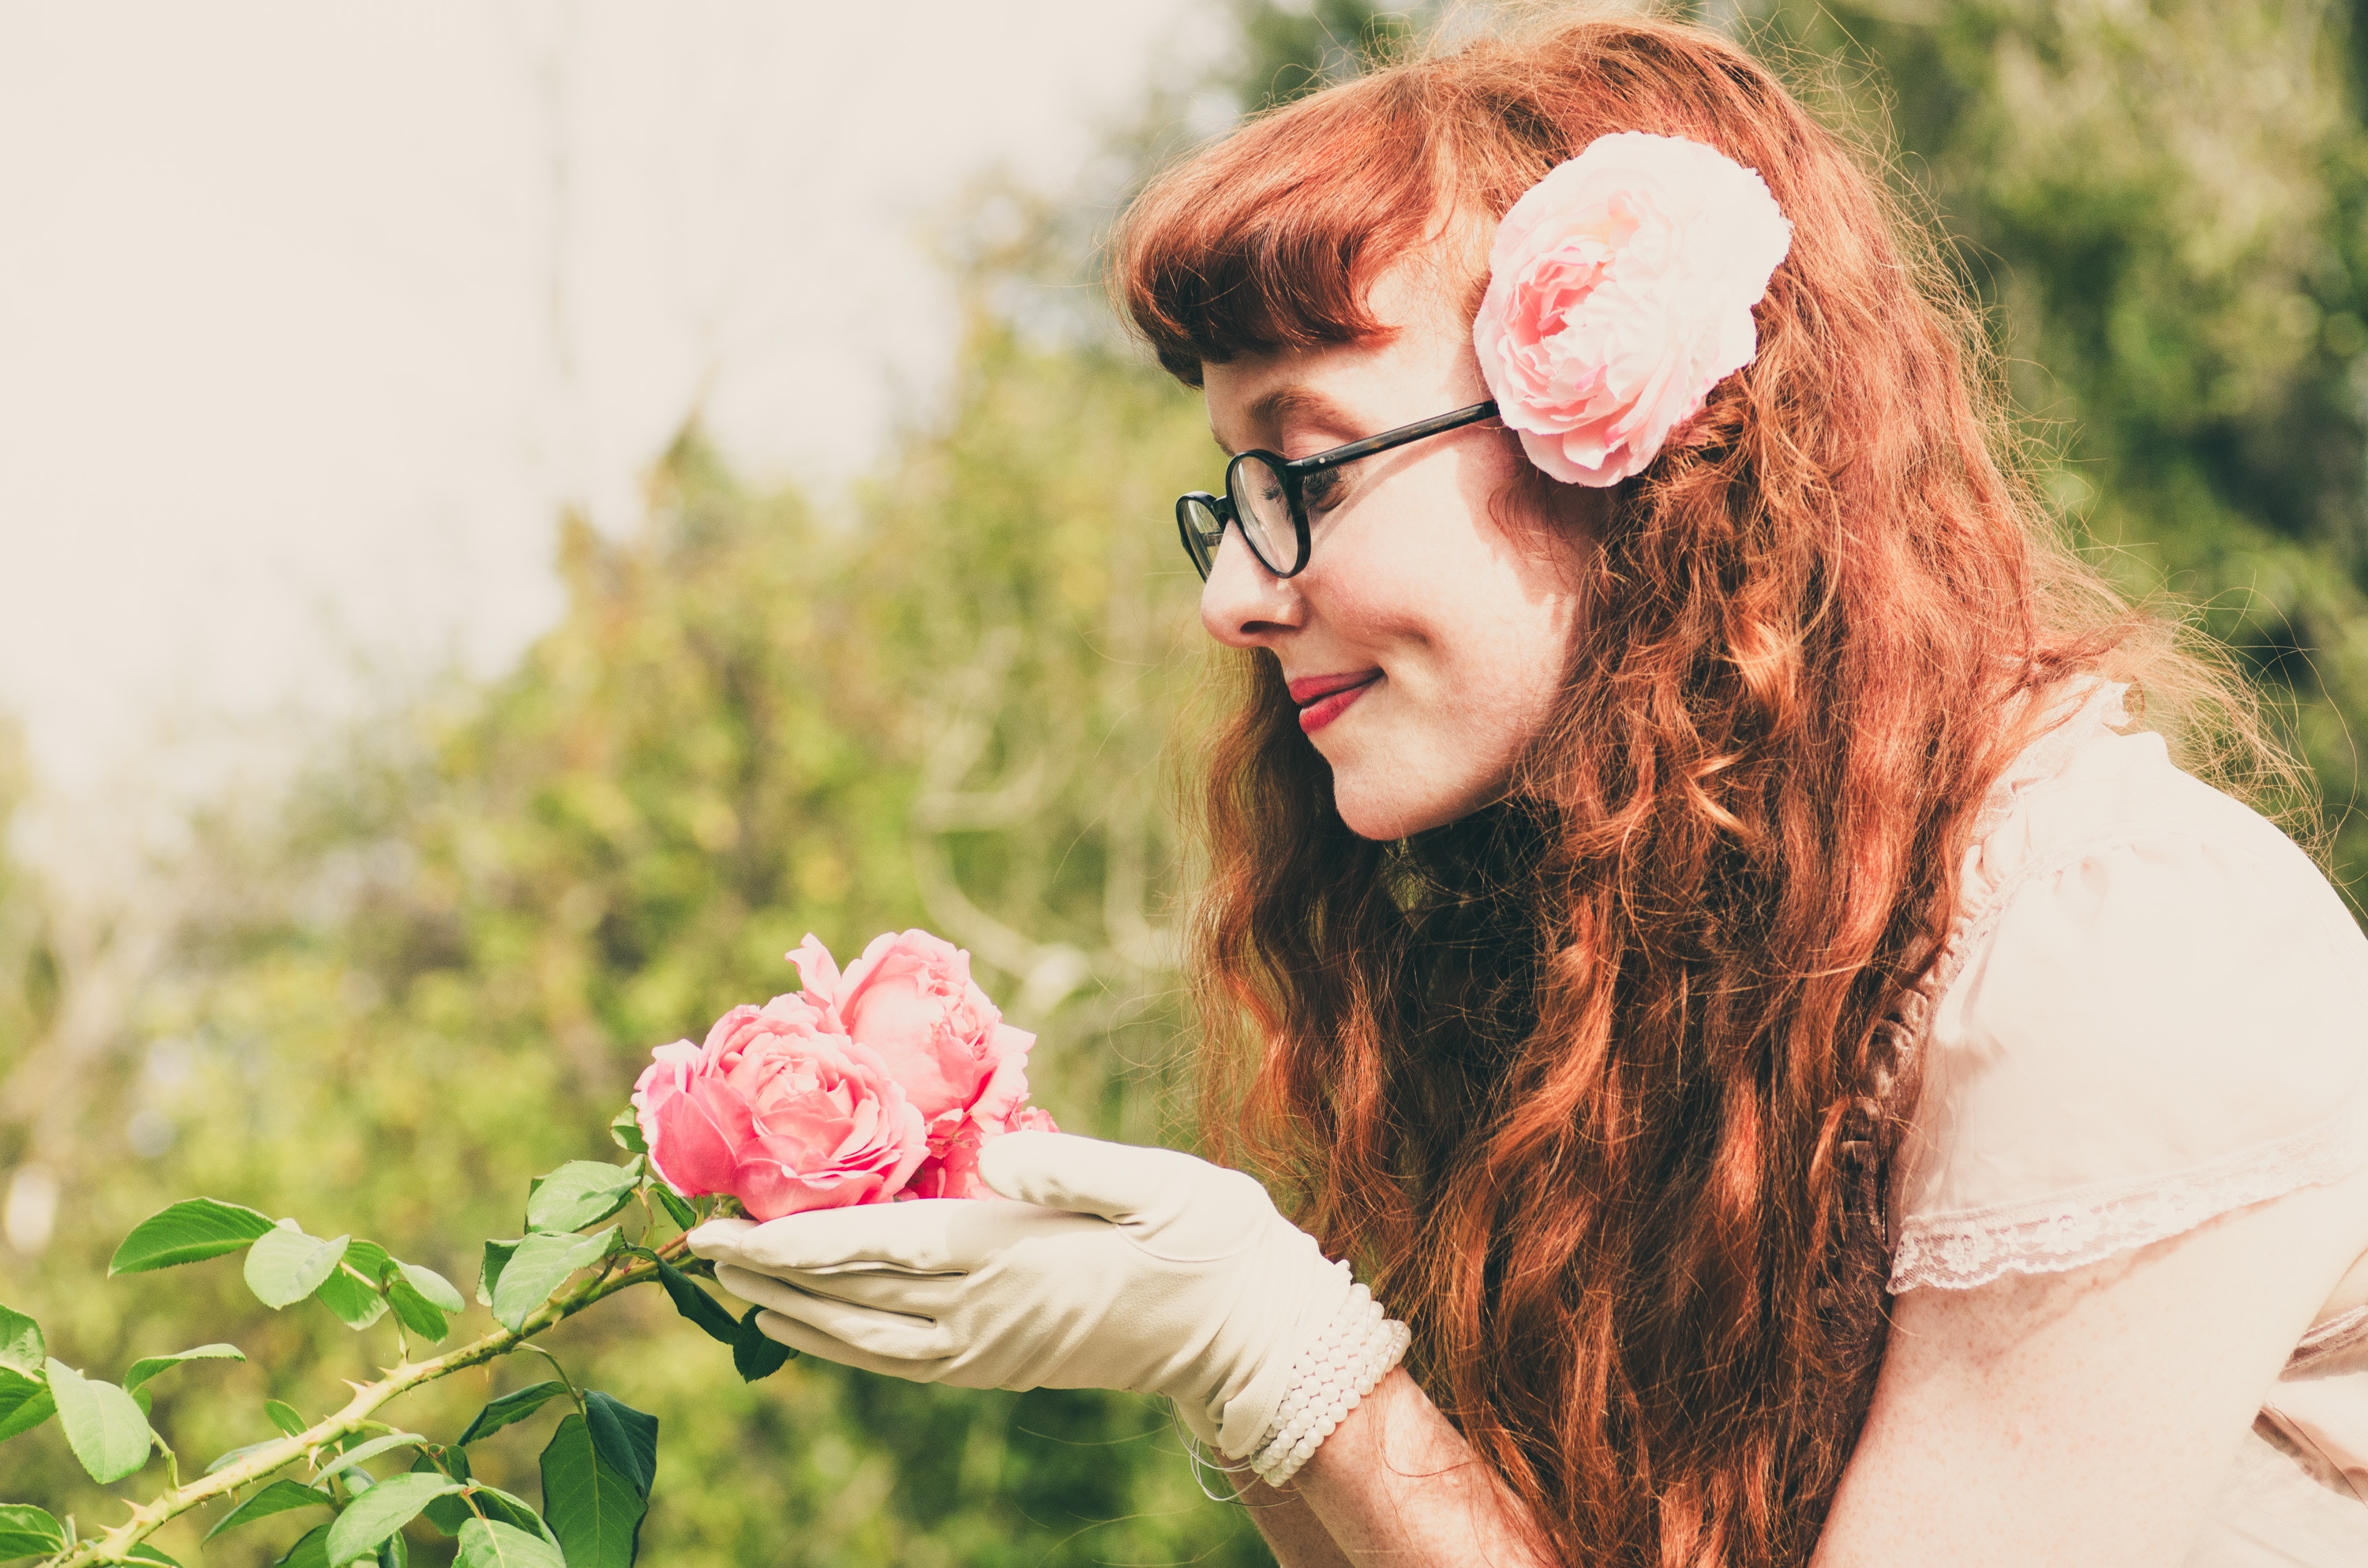 Woman smelling a rose in her garden enjoying the outdoors